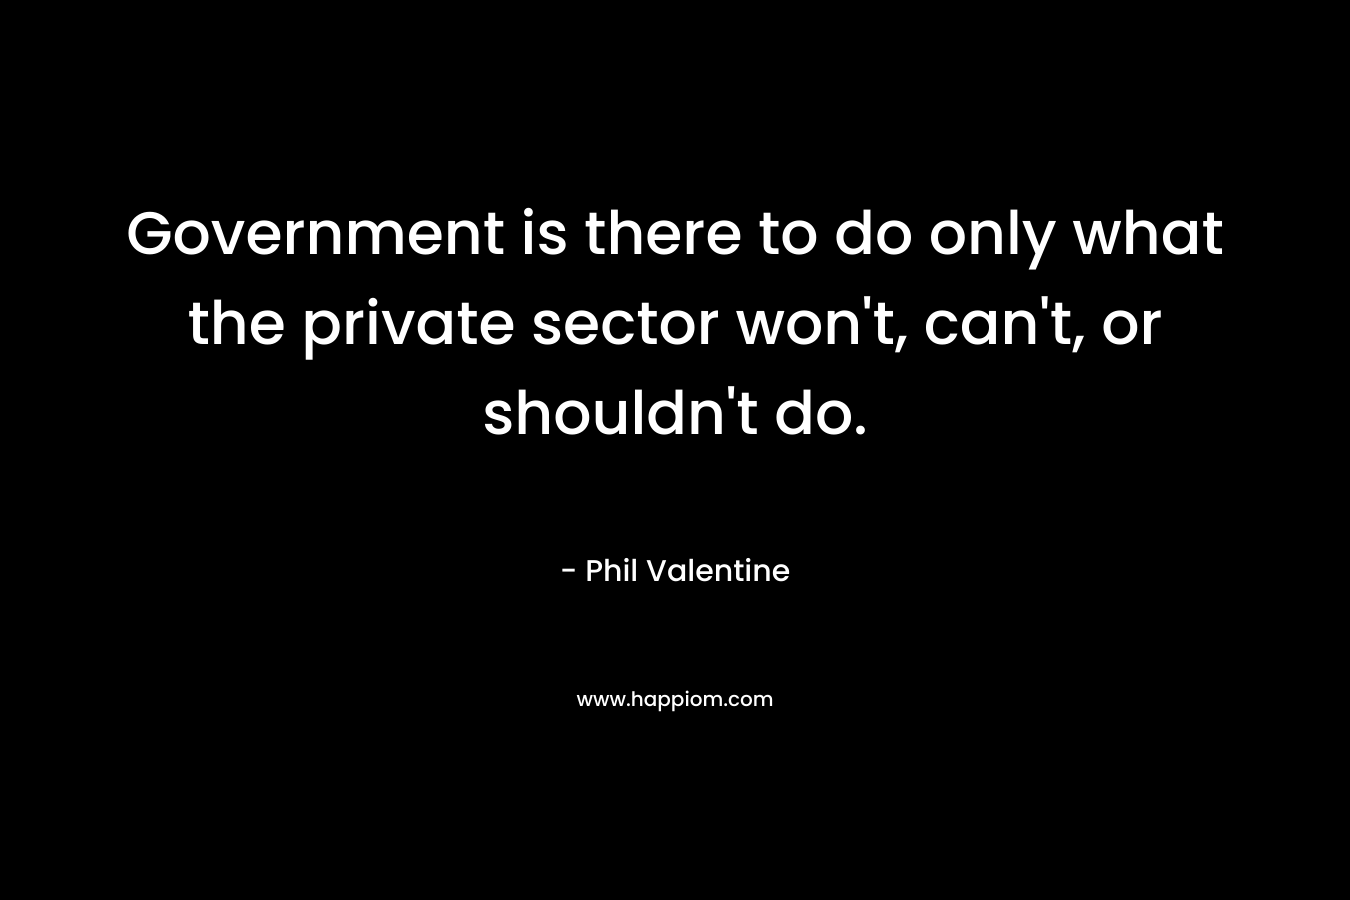 Government is there to do only what the private sector won’t, can’t, or shouldn’t do. – Phil Valentine